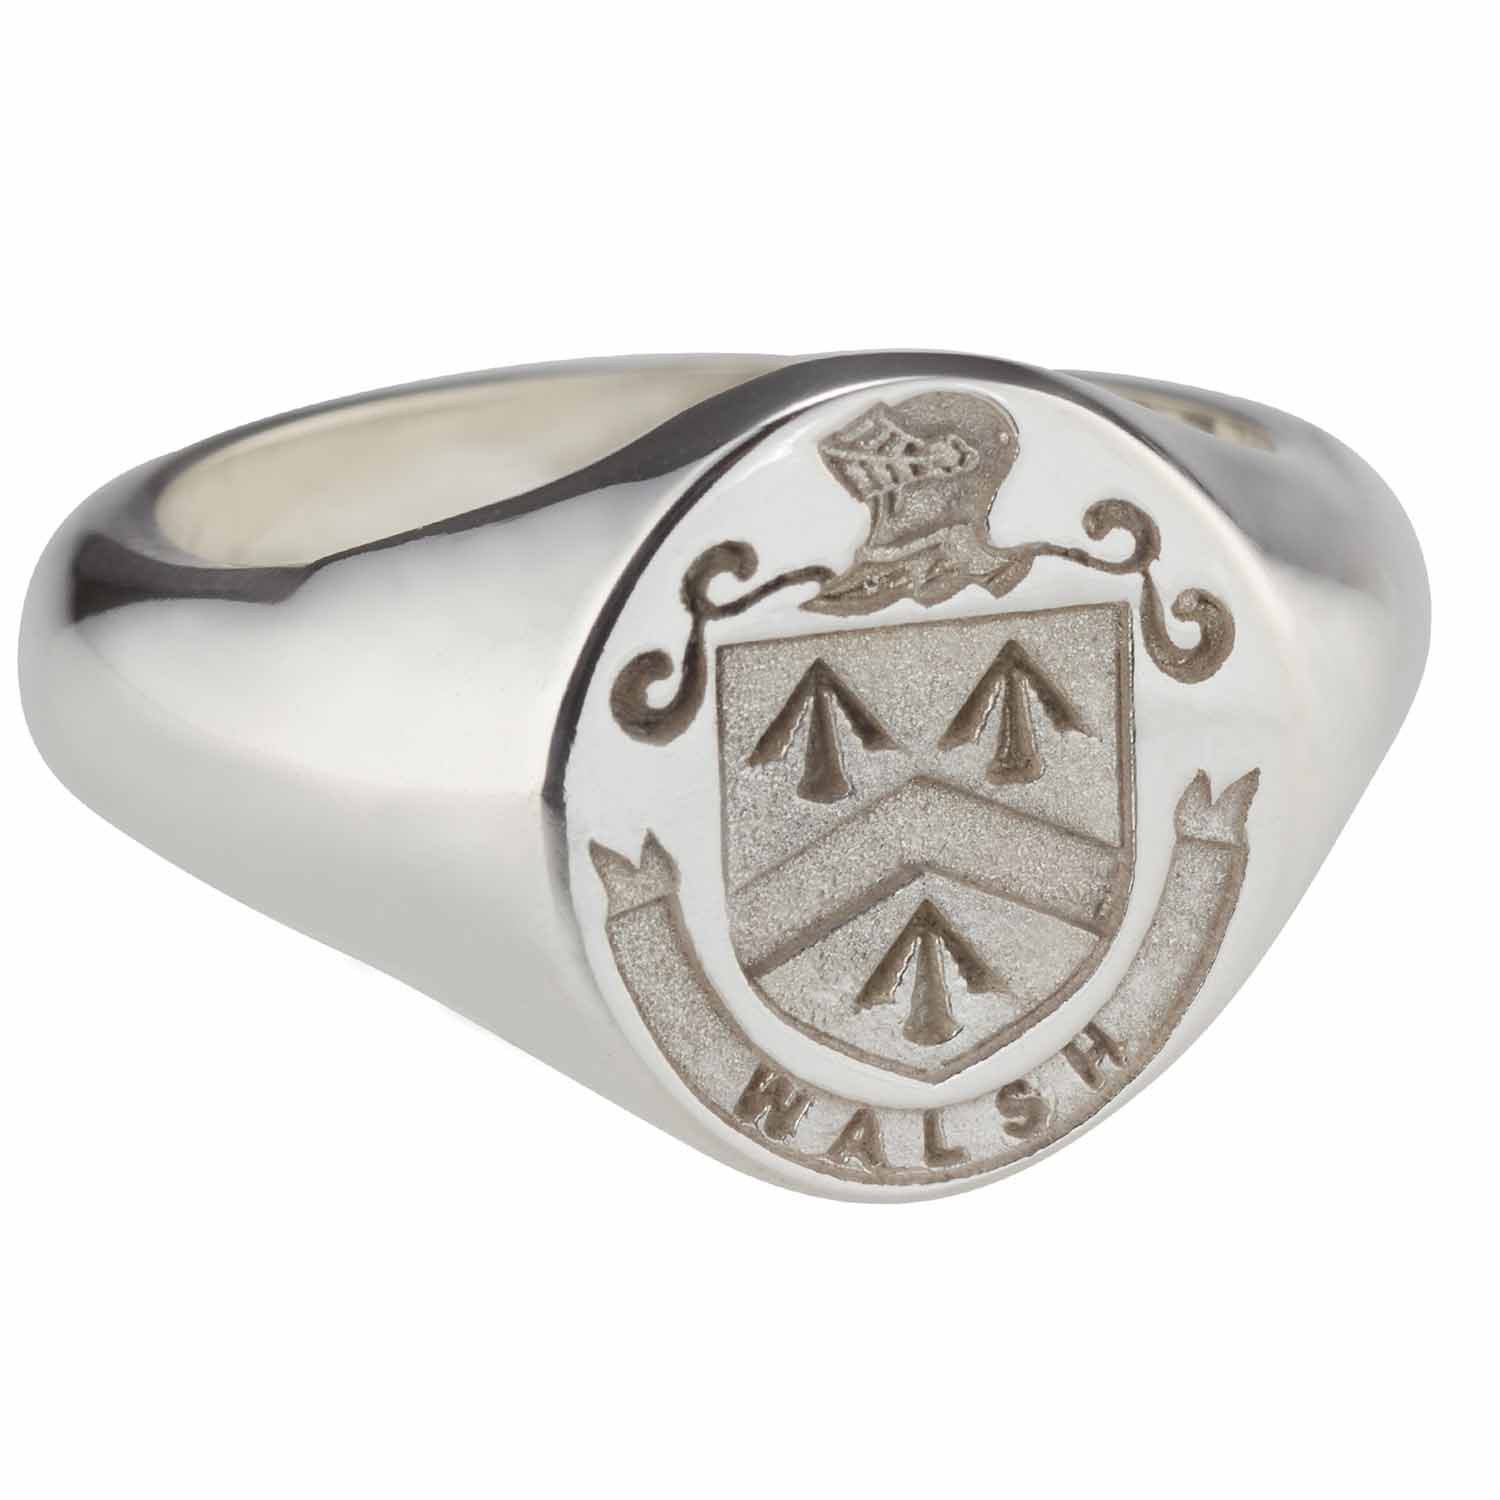 Product image for Irish Rings - Sterling Silver Personalized Full Coat of Arms Ring